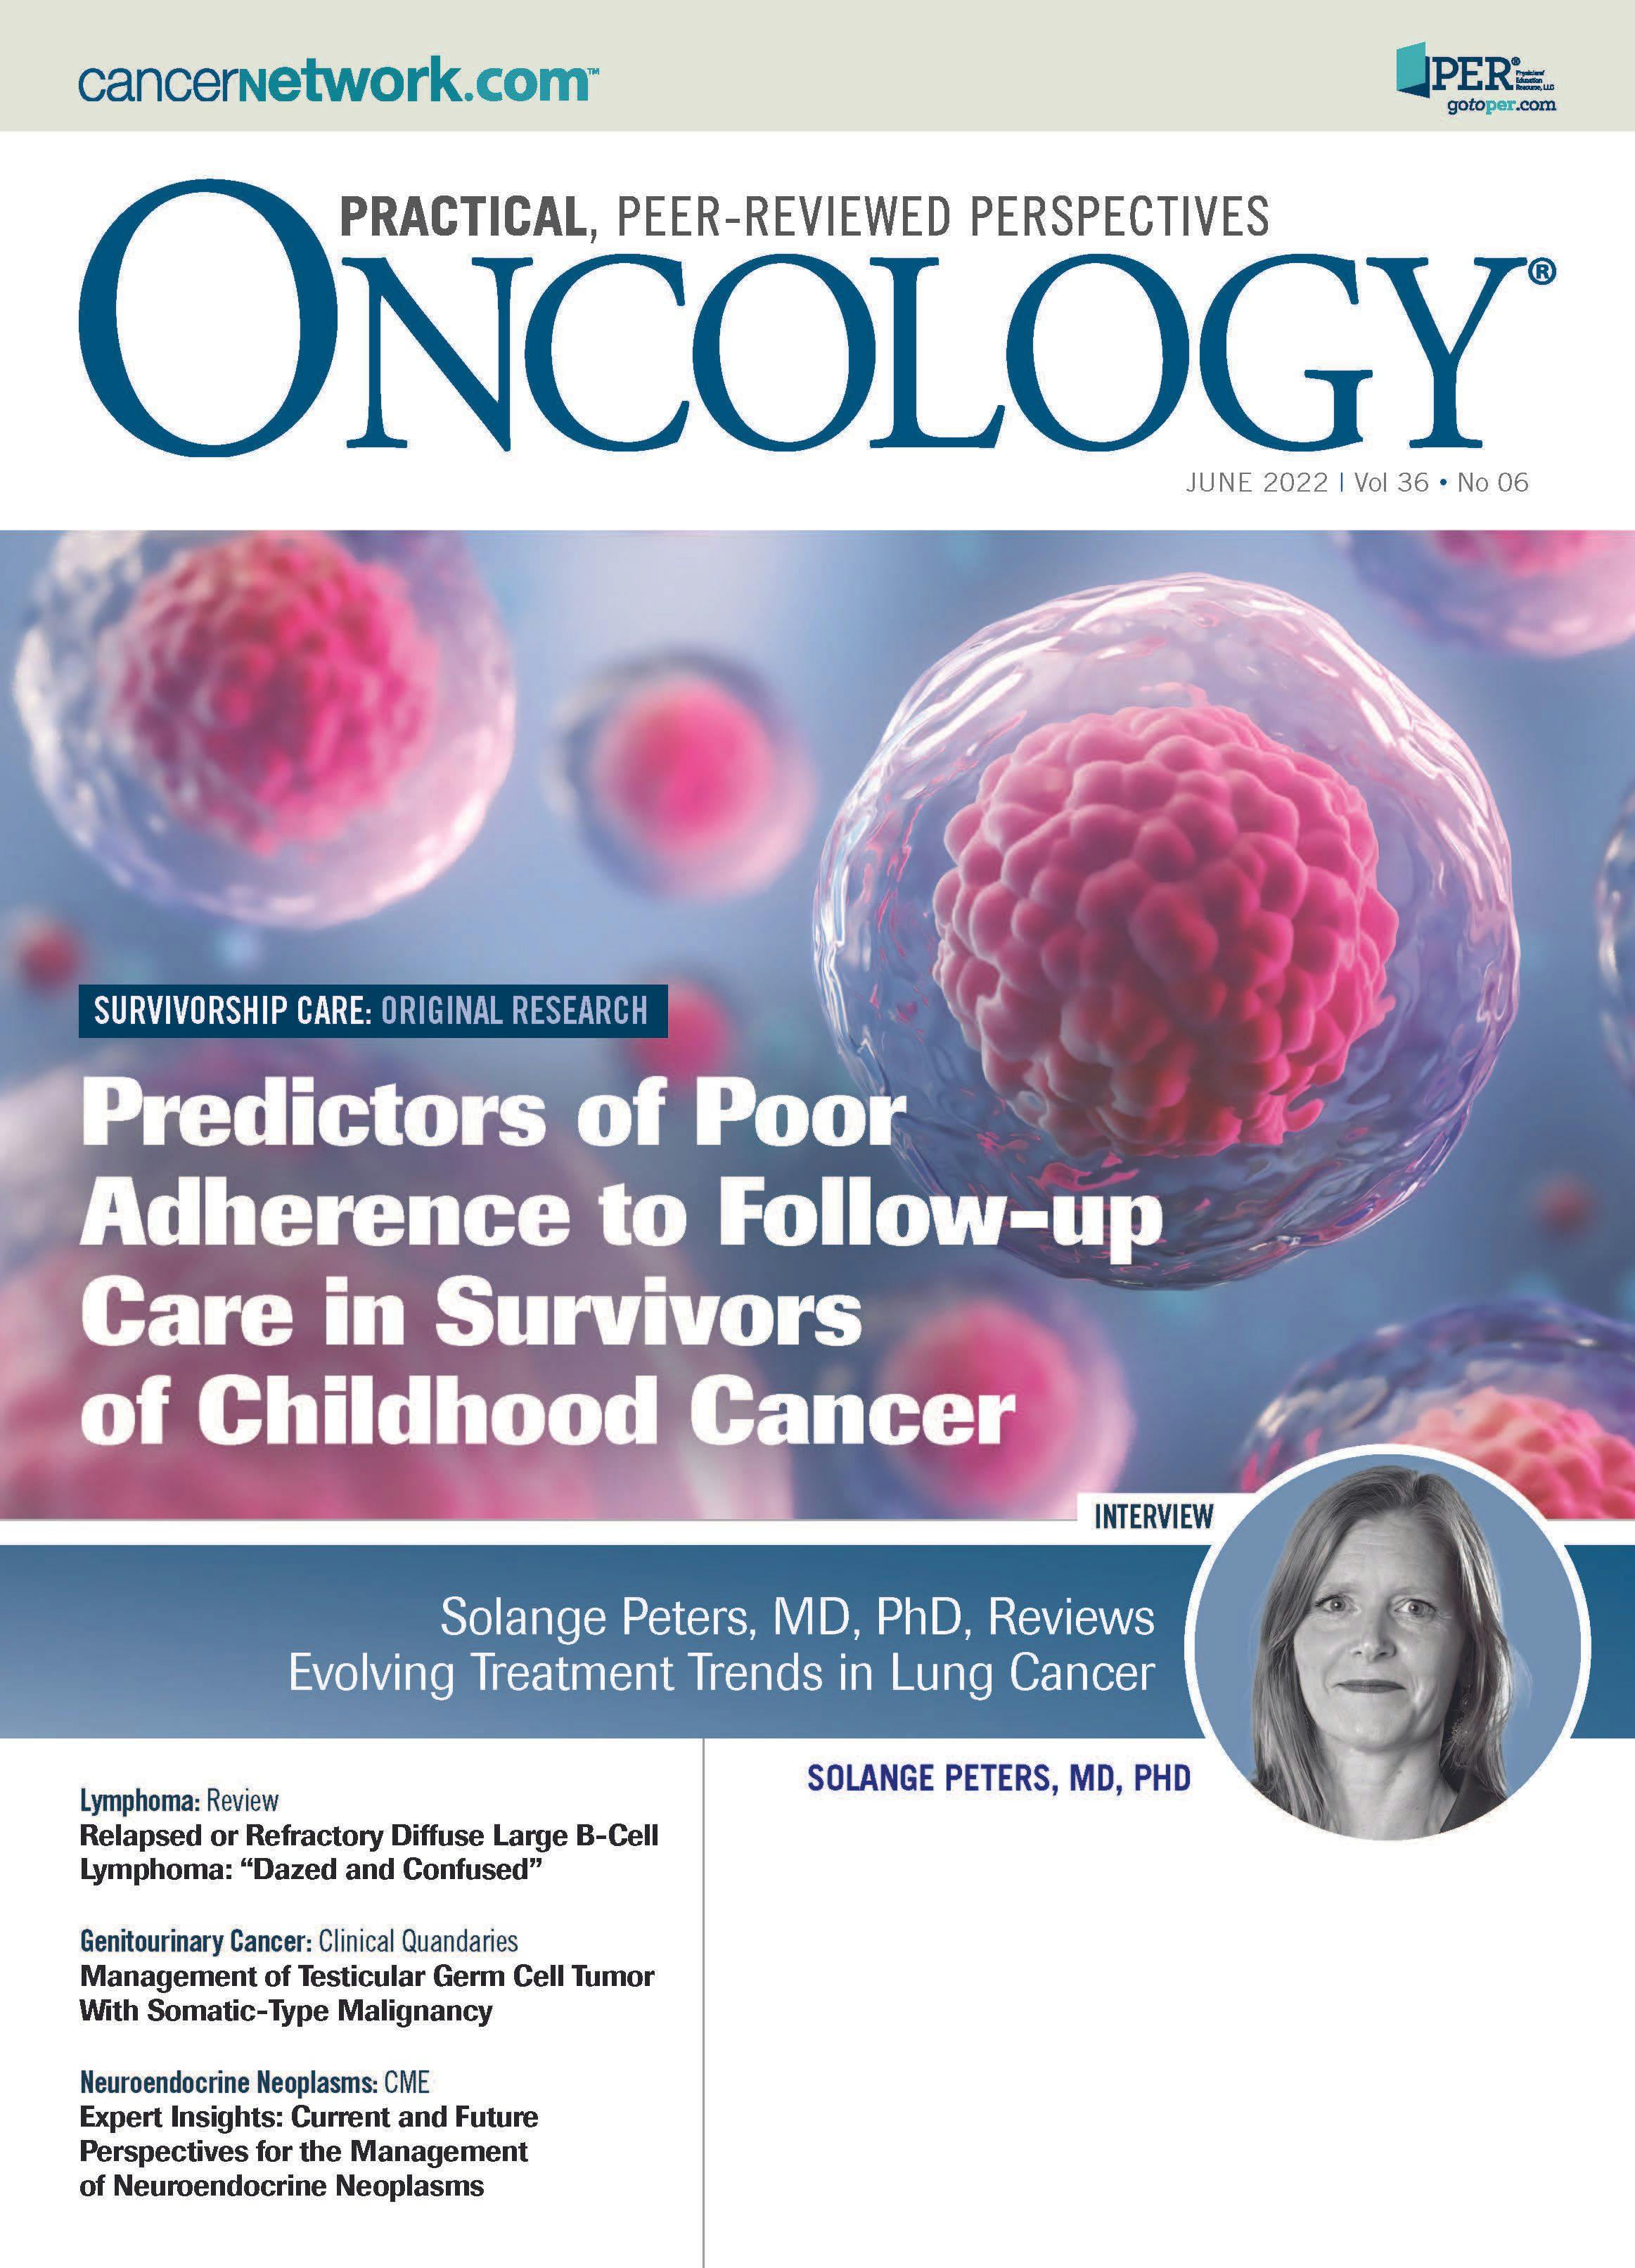 ONCOLOGY Vol 36, Issue 6